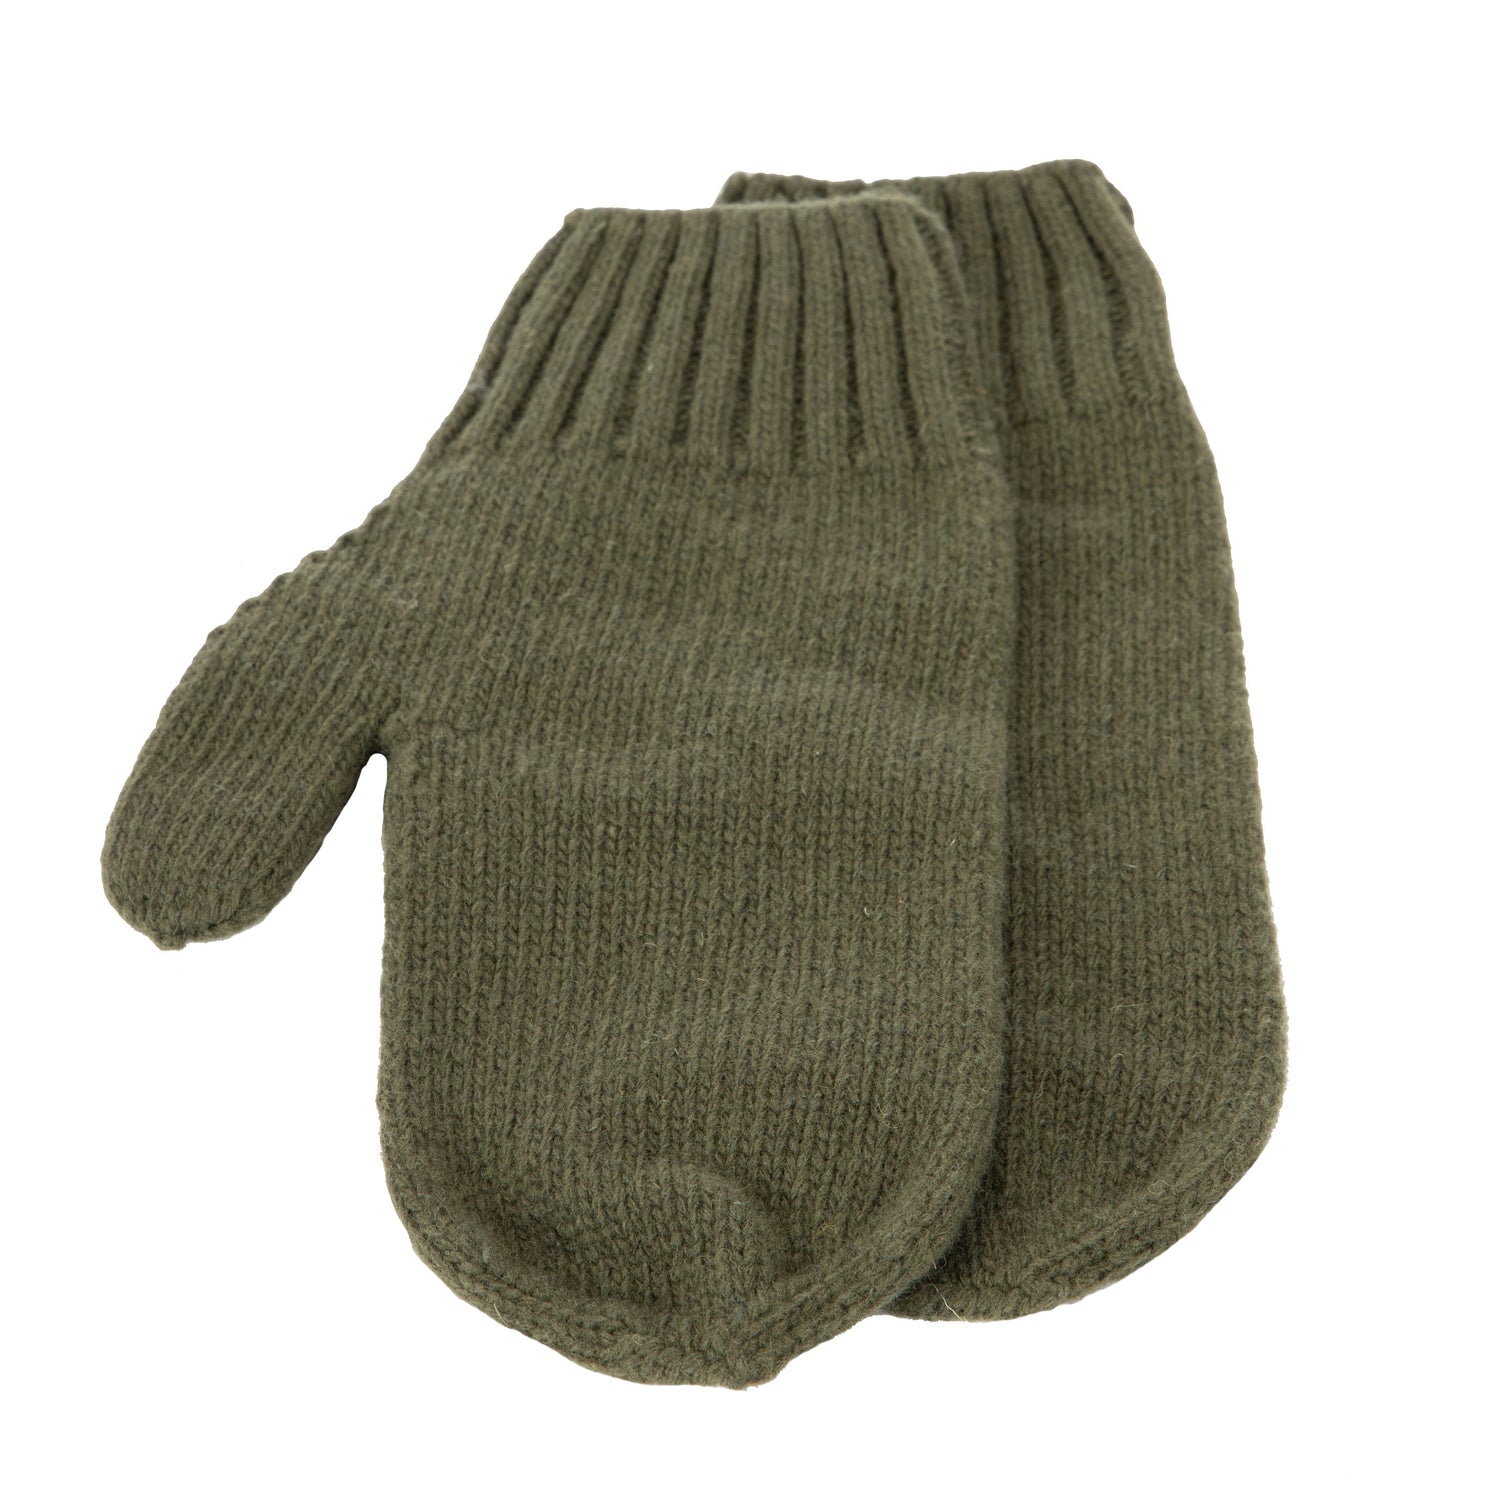 North Outdoor Kivi Mittens - 100% Merino Wool - Made in Finland Olive Green Gloves